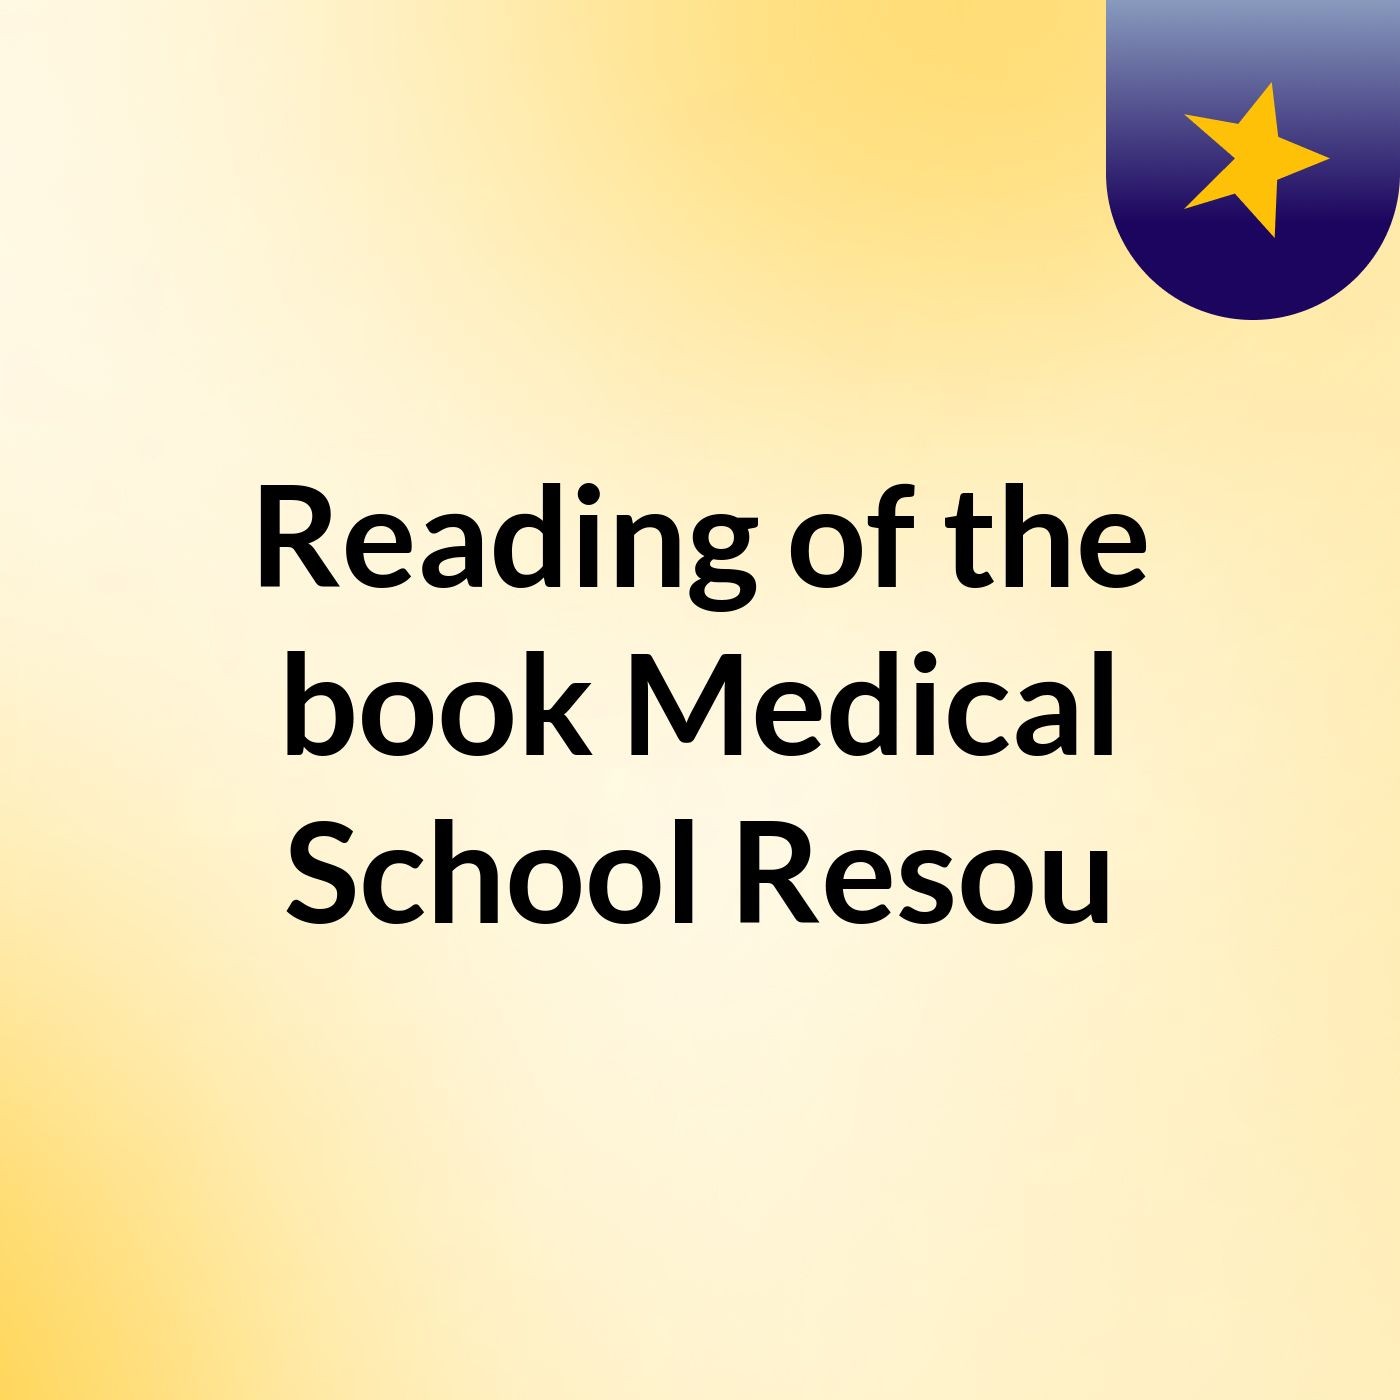 Reading of the book Medical School Resou